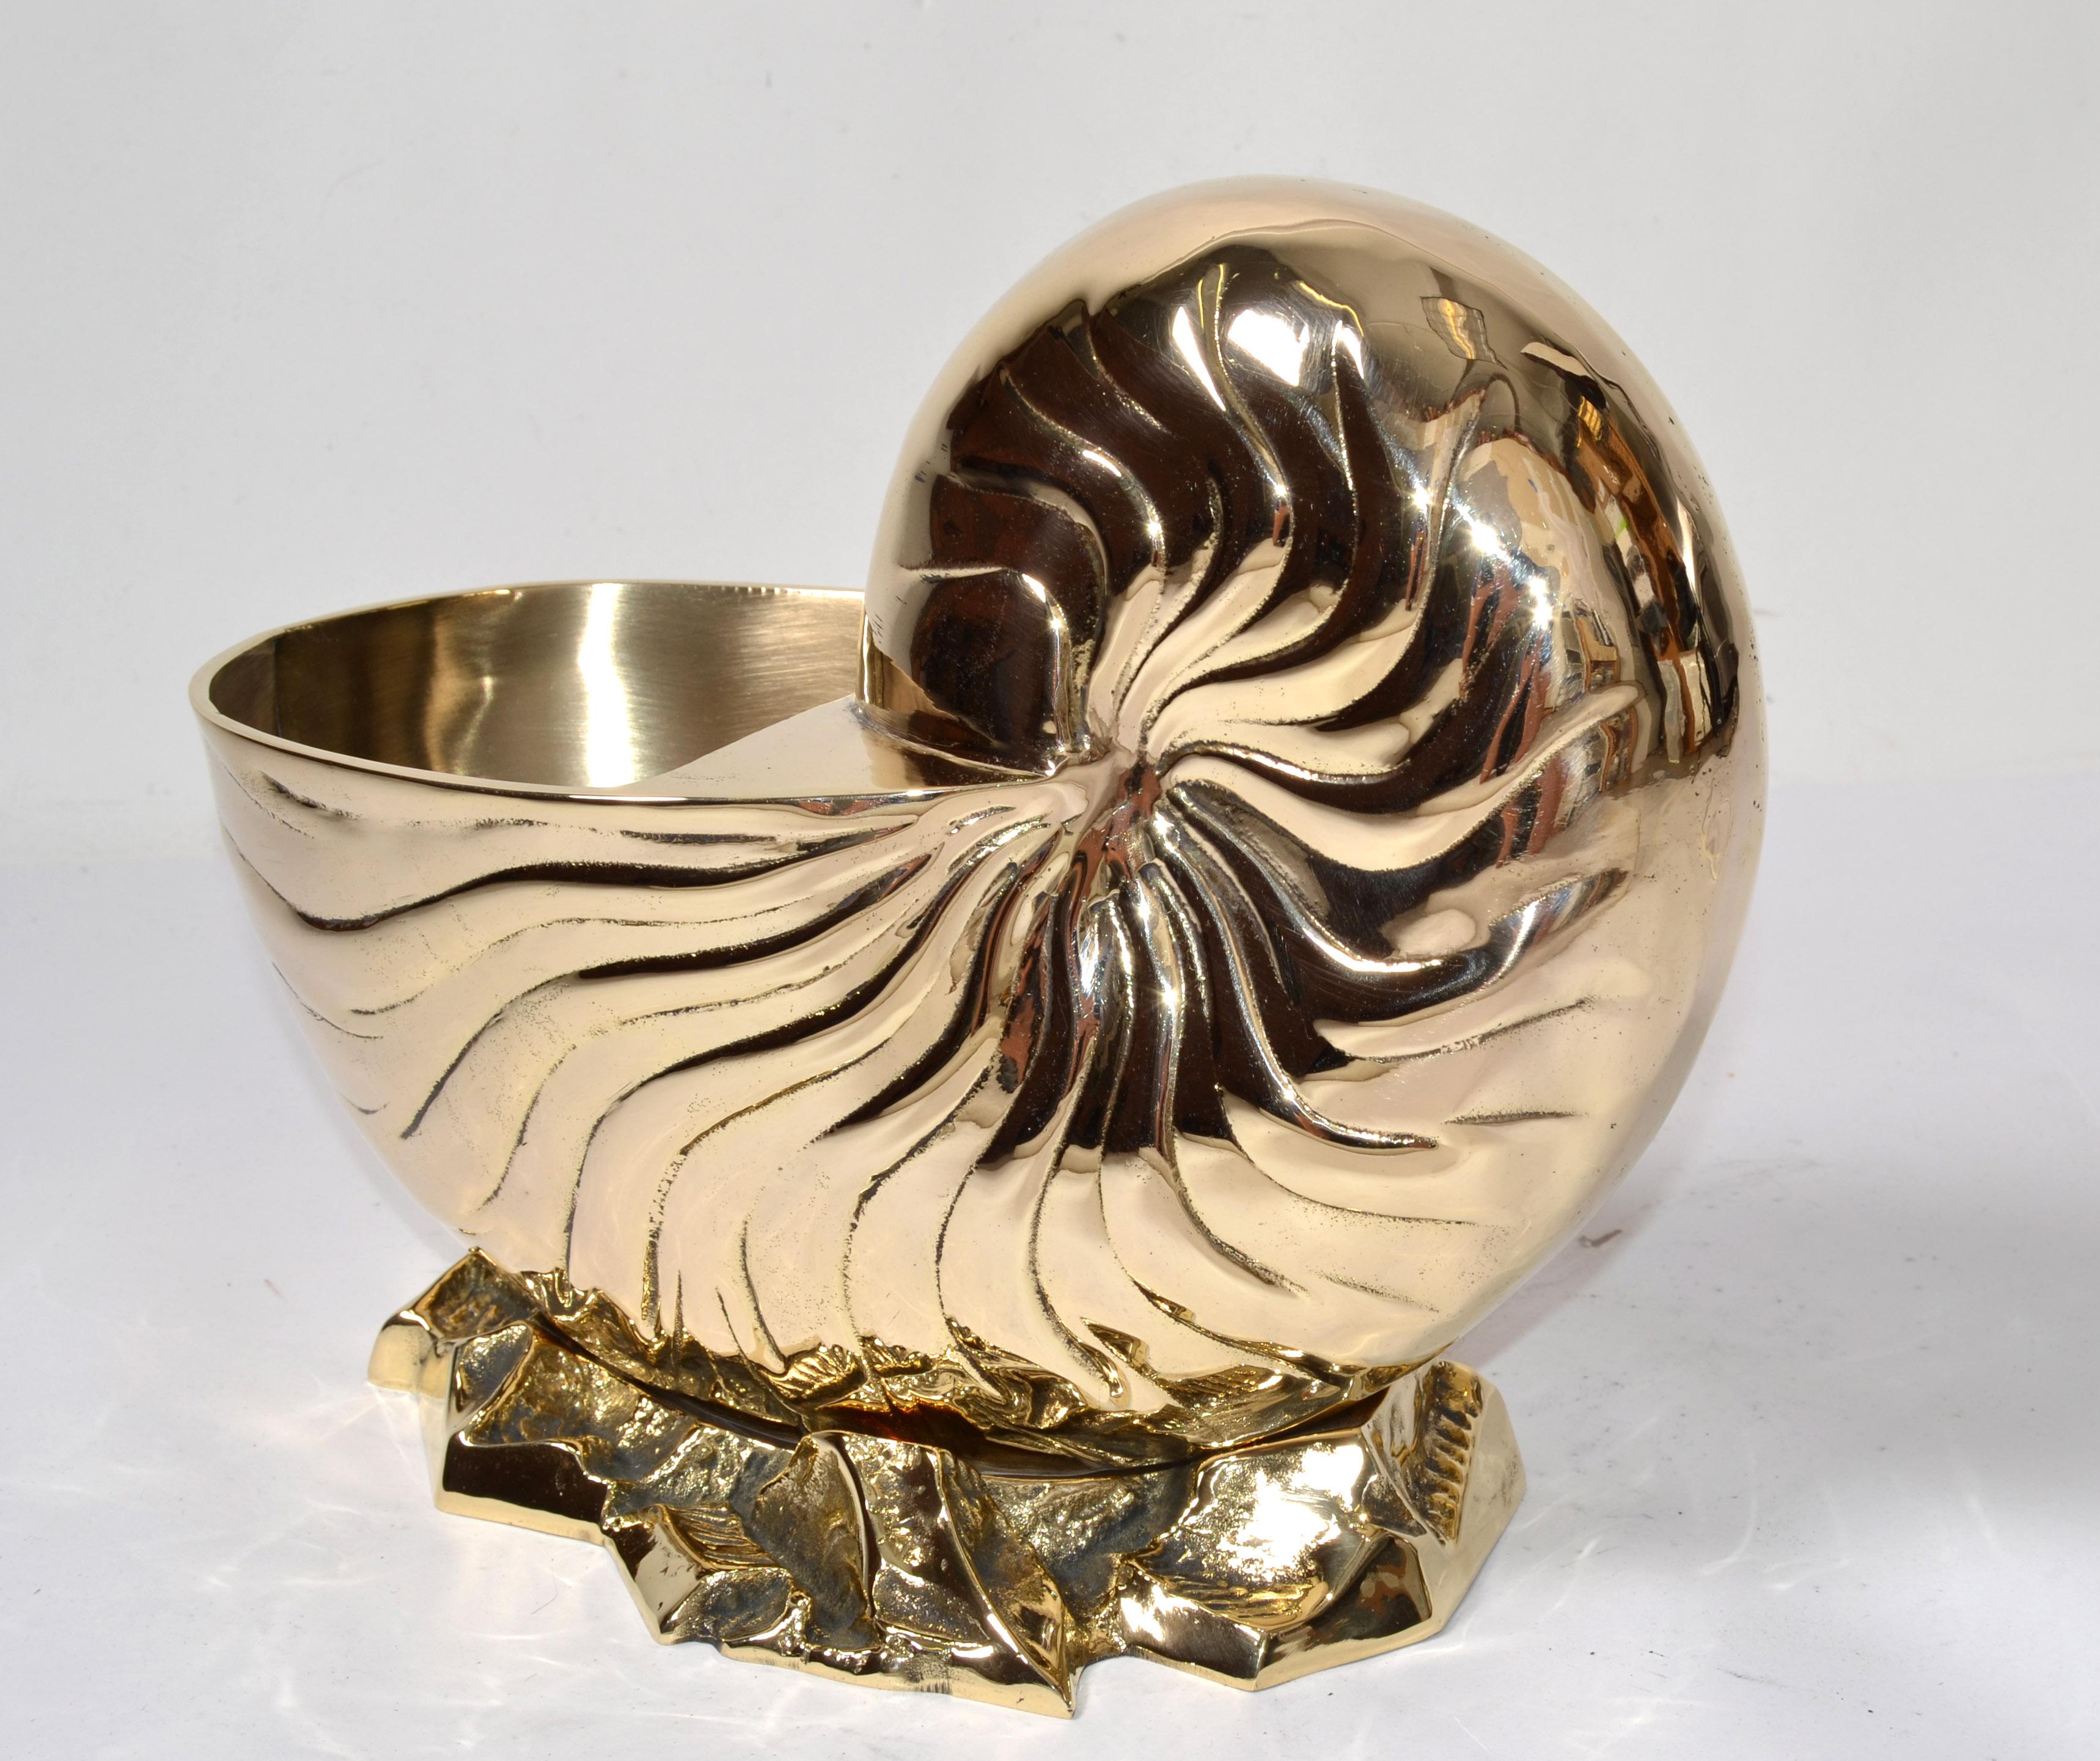 Hollywood Regency Polished Bronze Nautilus Seashell Footed Planter Nautical Art In Good Condition For Sale In Miami, FL